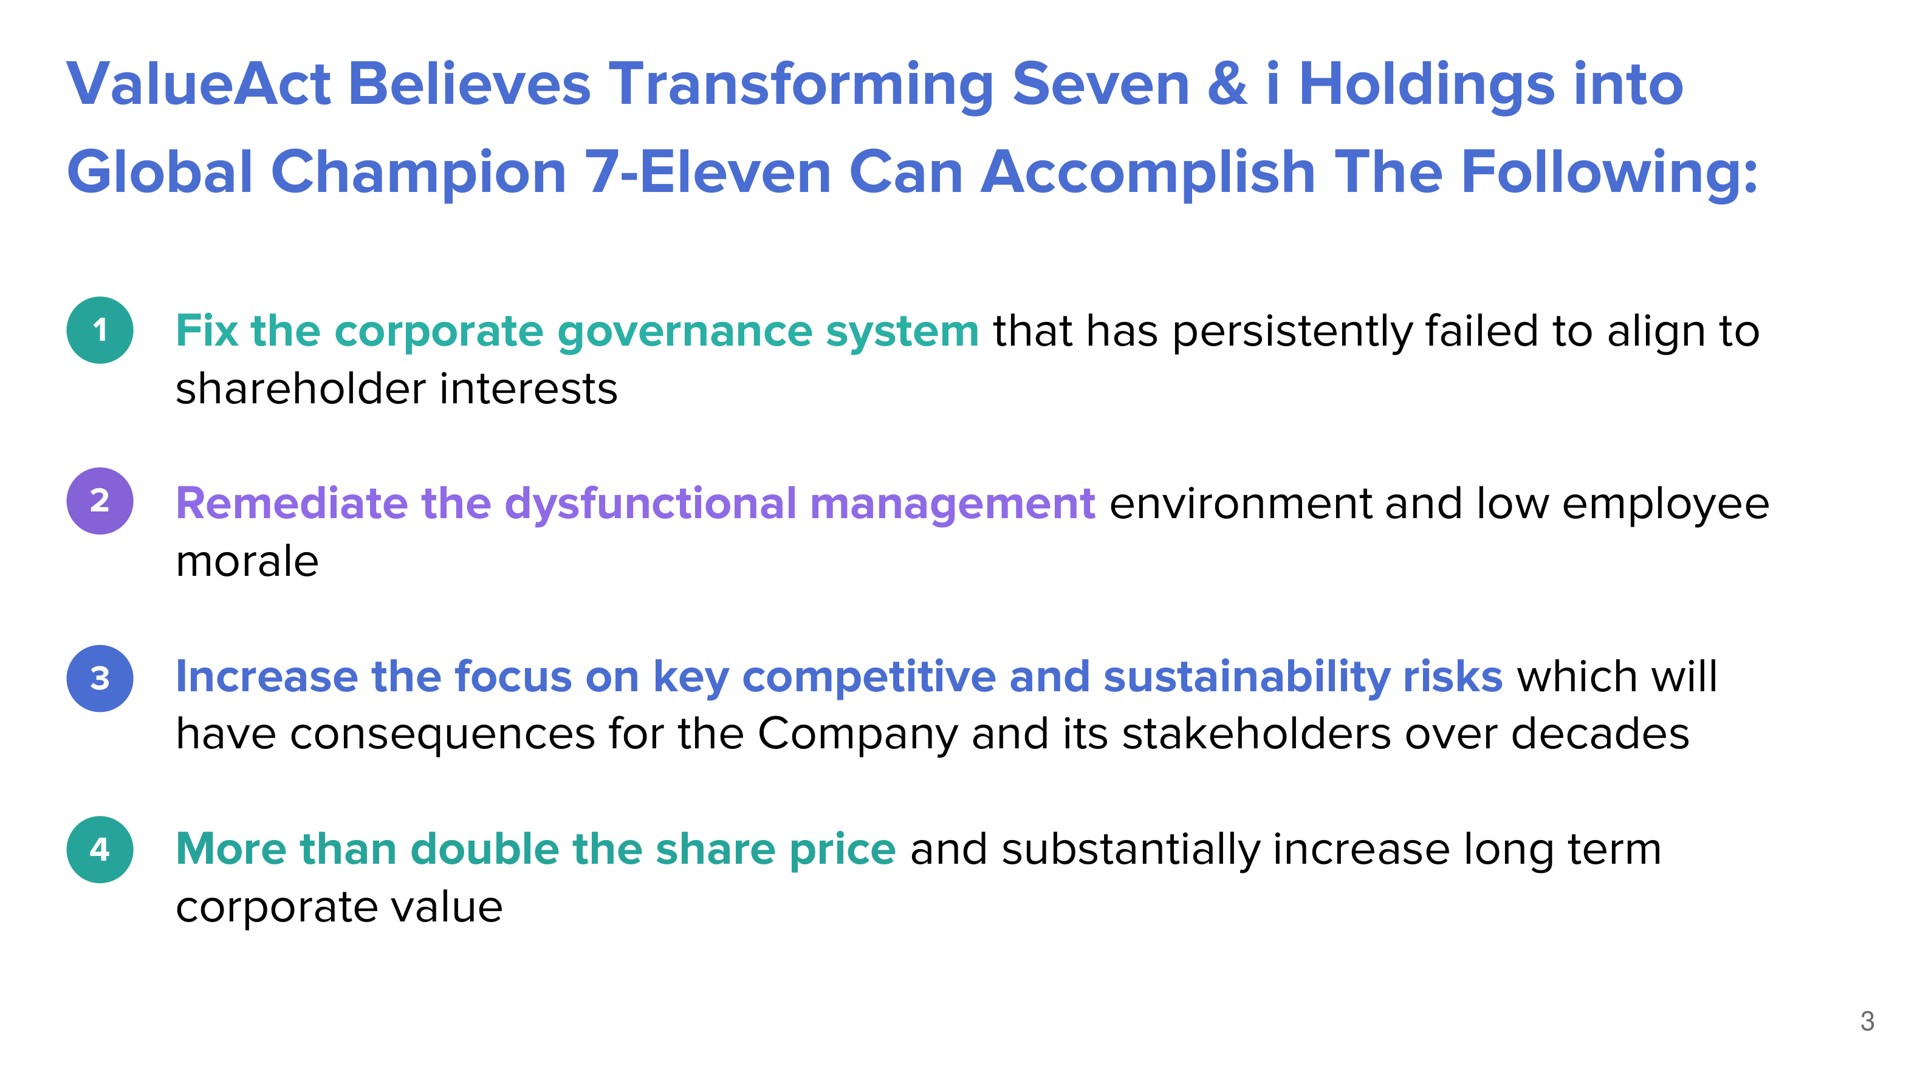 believes transforming seven i holdings into global champion eleven can accomplish the following fix the corporate governance system that has persistently failed to align to shareholder interests the management environment and low employee morale increase the focus on key competitive and risks which will have consequences for the company and its stakeholders over decades more than double the share price and substantially increase long term corporate value | ValueAct Capital